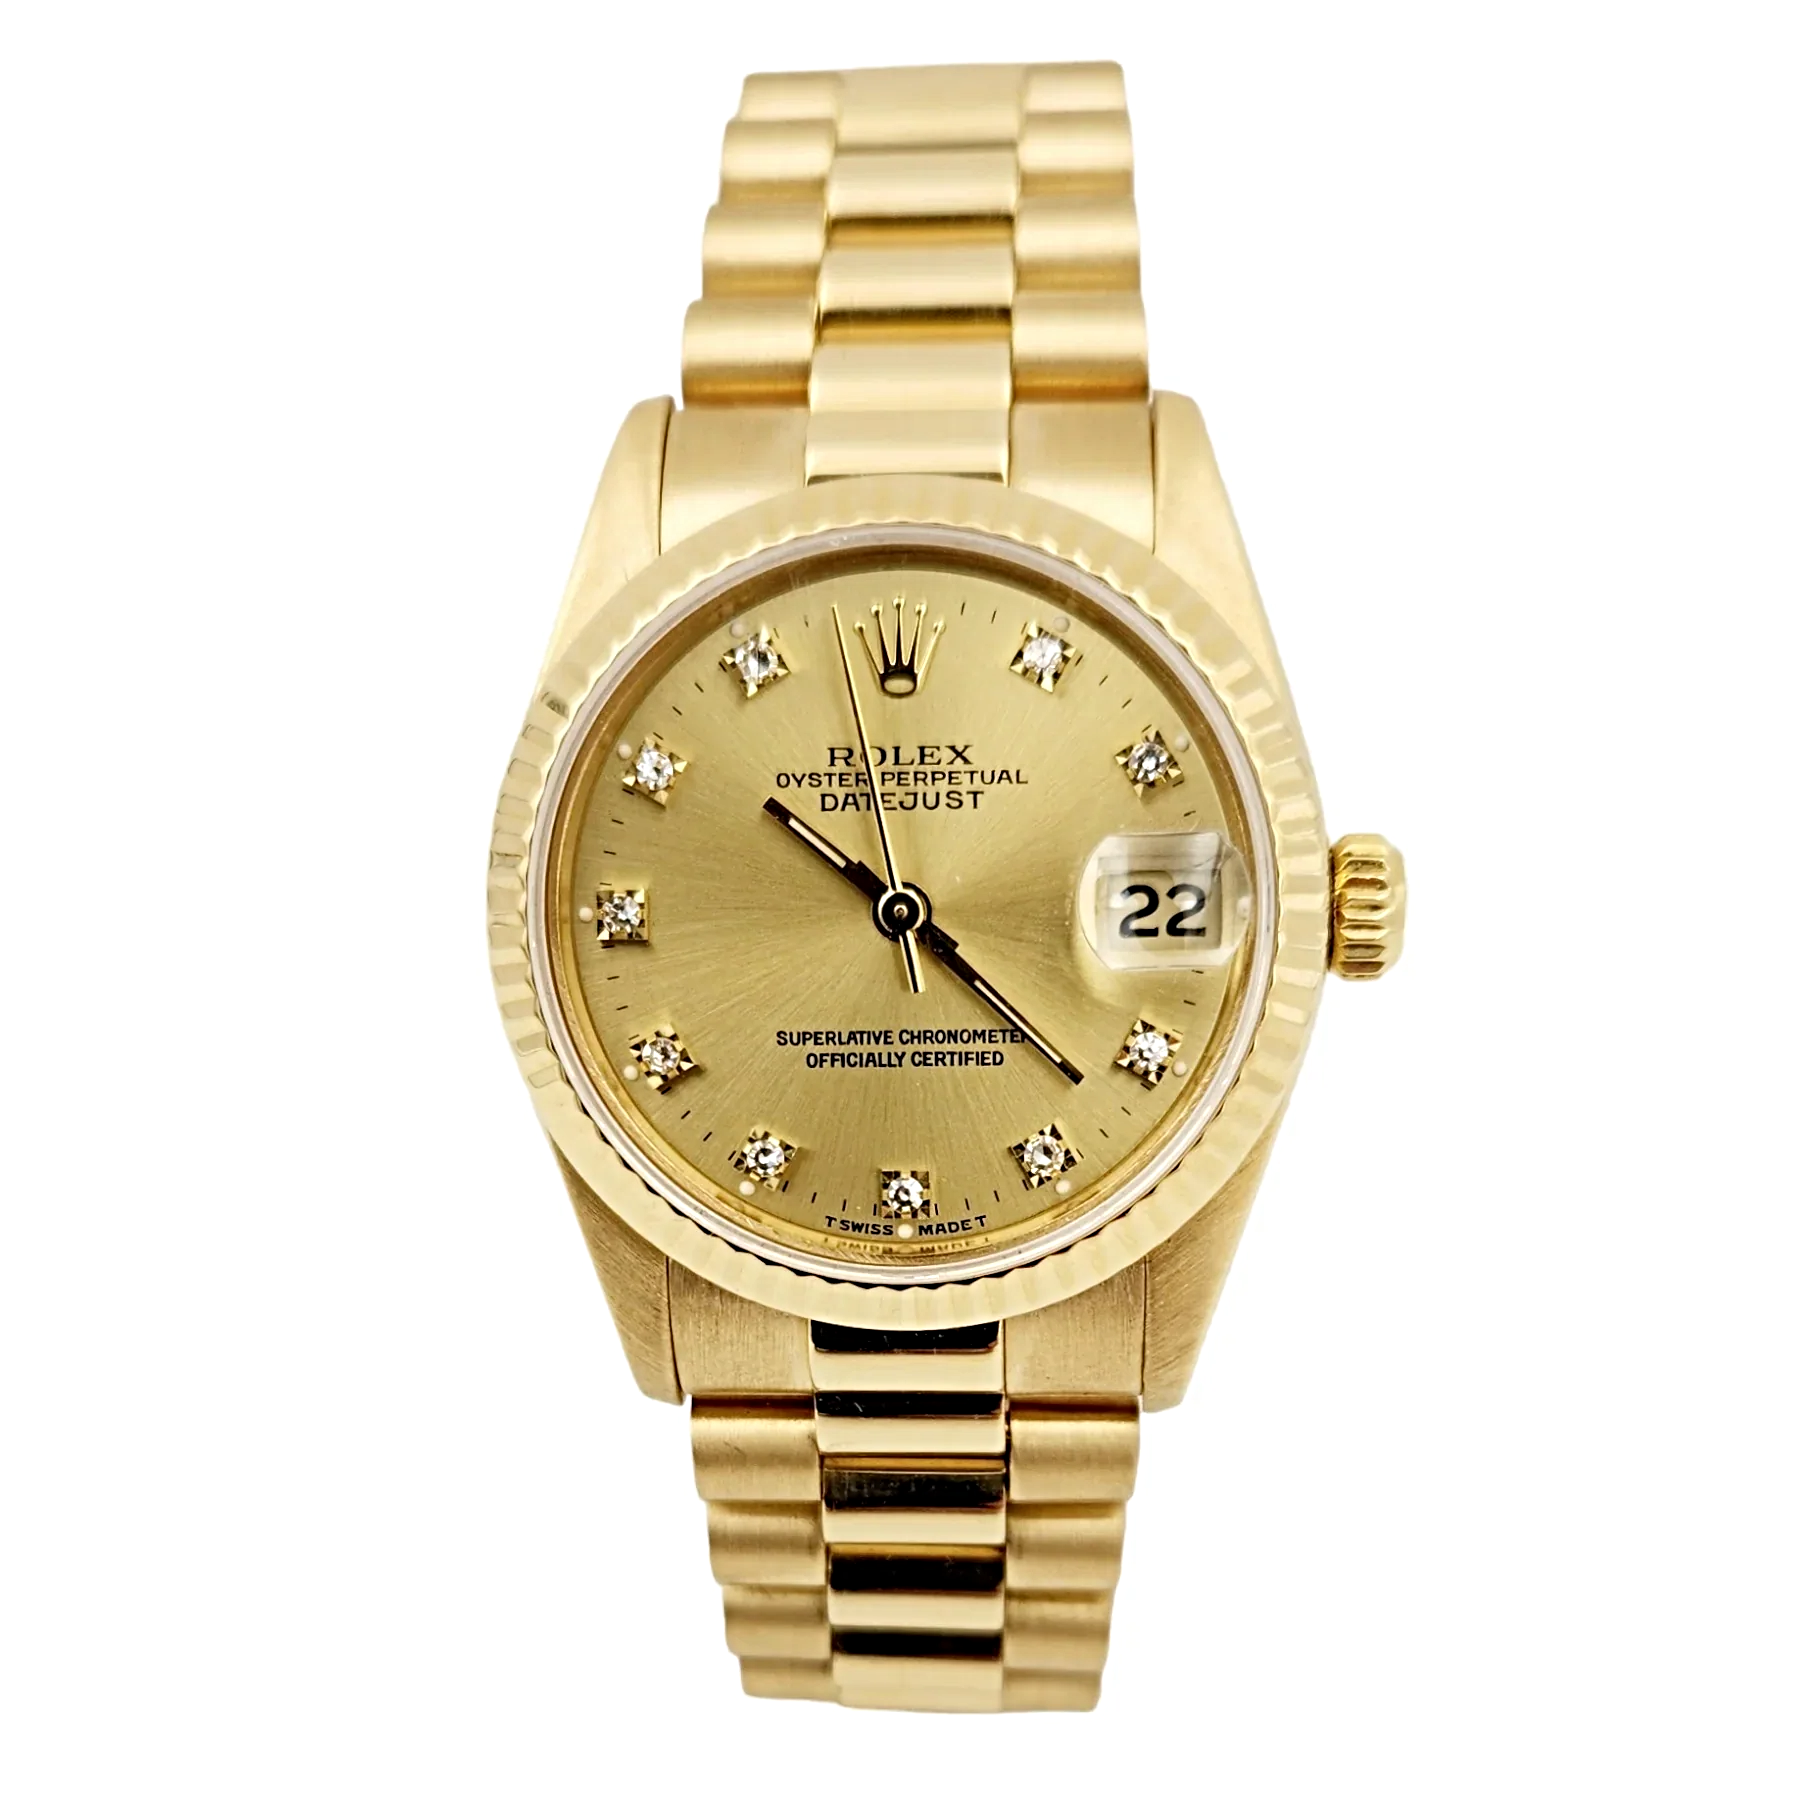 Ladies Rolex 31mm Midsize Presidential 18K Solid Yellow Gold Watch with Champagne Diamond Dial and Fluted Bezel. (Pre-Owned 68278)